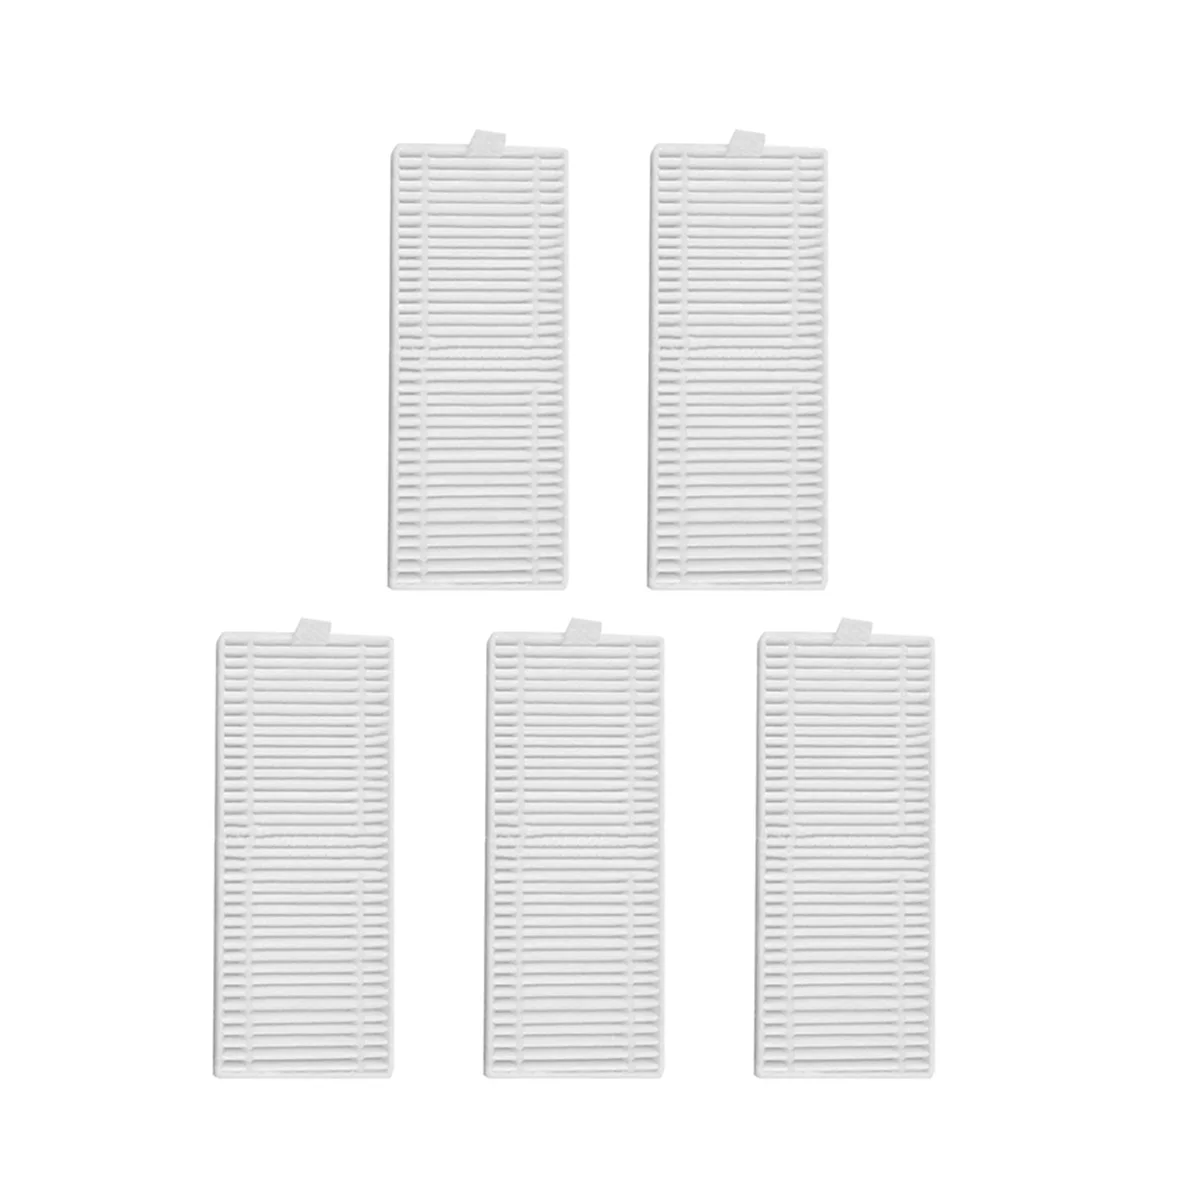 

5PCS Vacuum Cleaner Replacement HEPA Filter Suitable for 360 S8 S8 Plus Sweeping Robot Accessories Filter